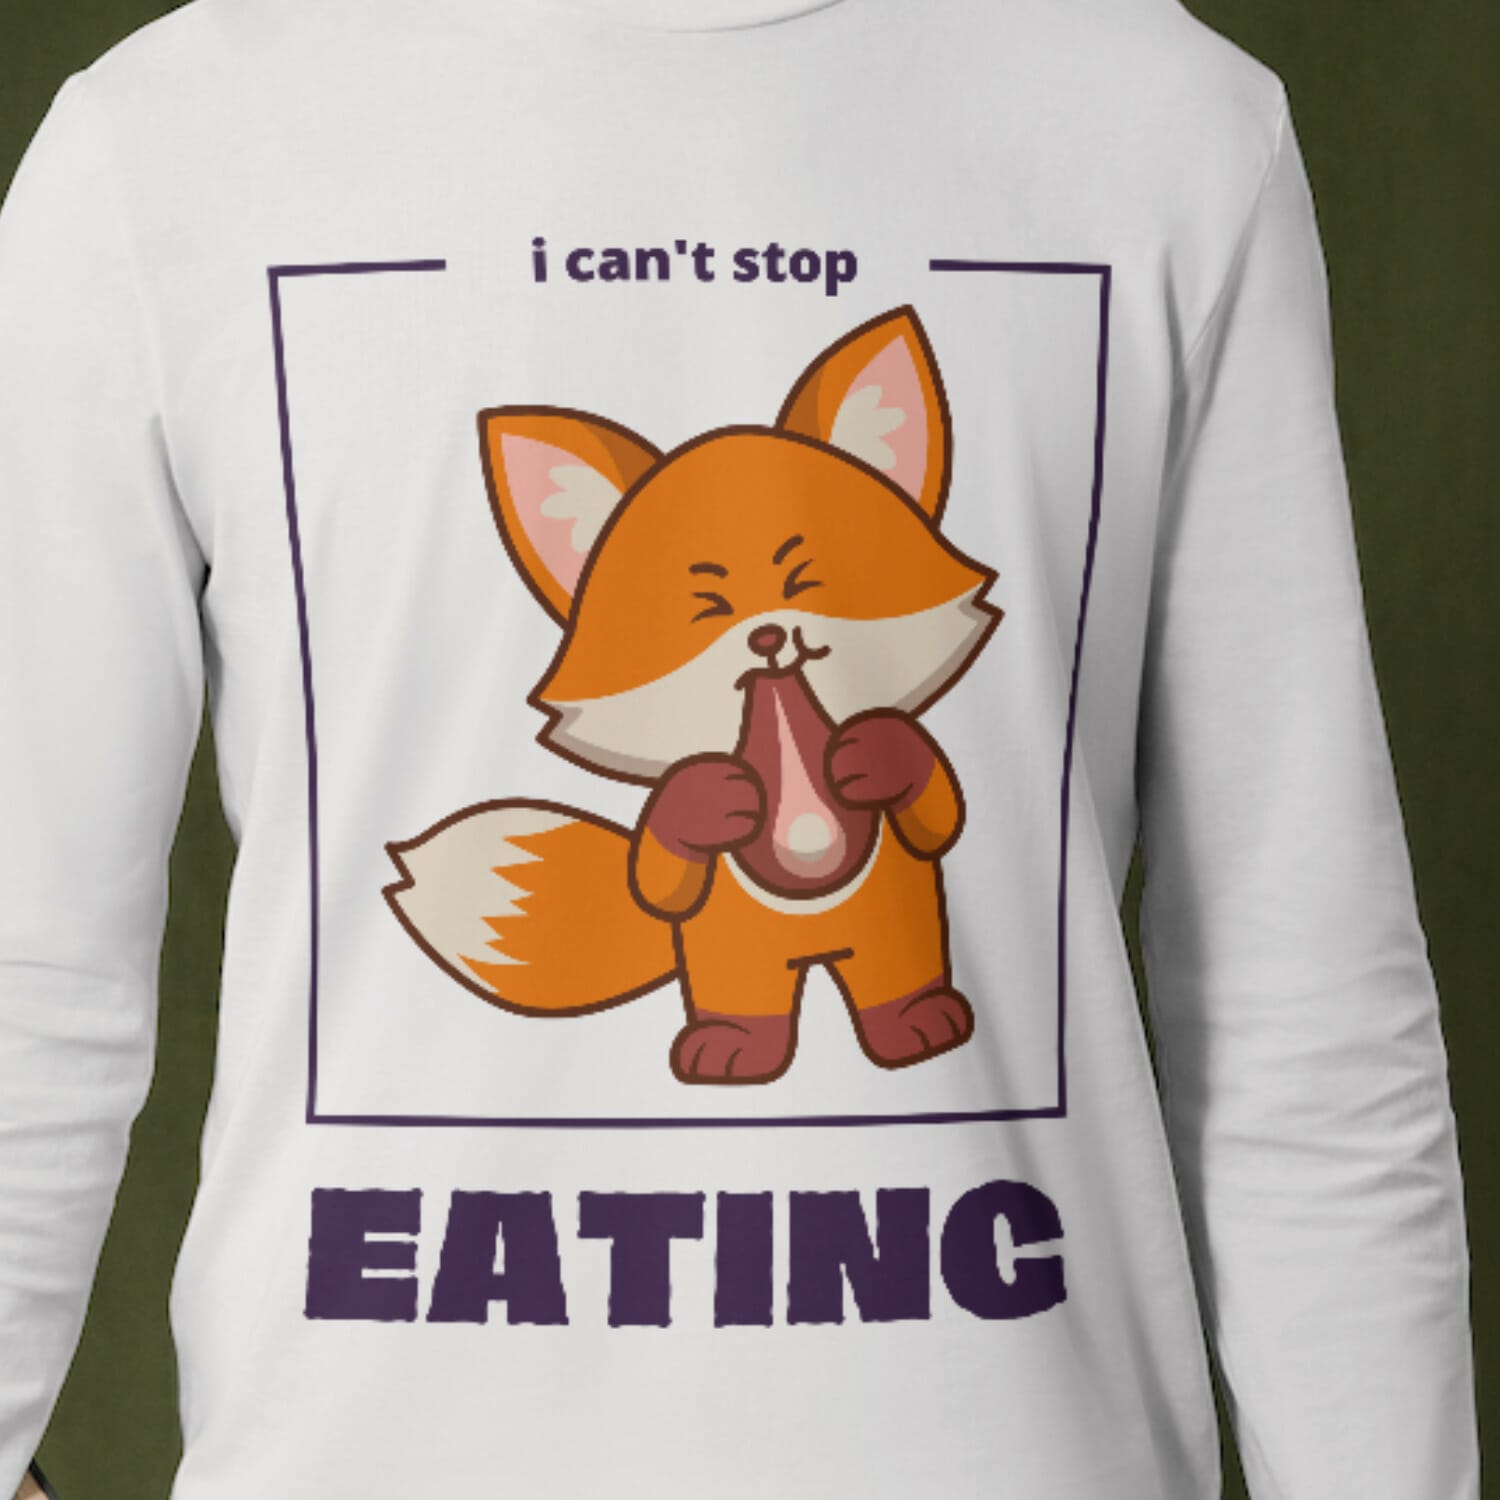 I Cant Stop Eating Tshirt Design